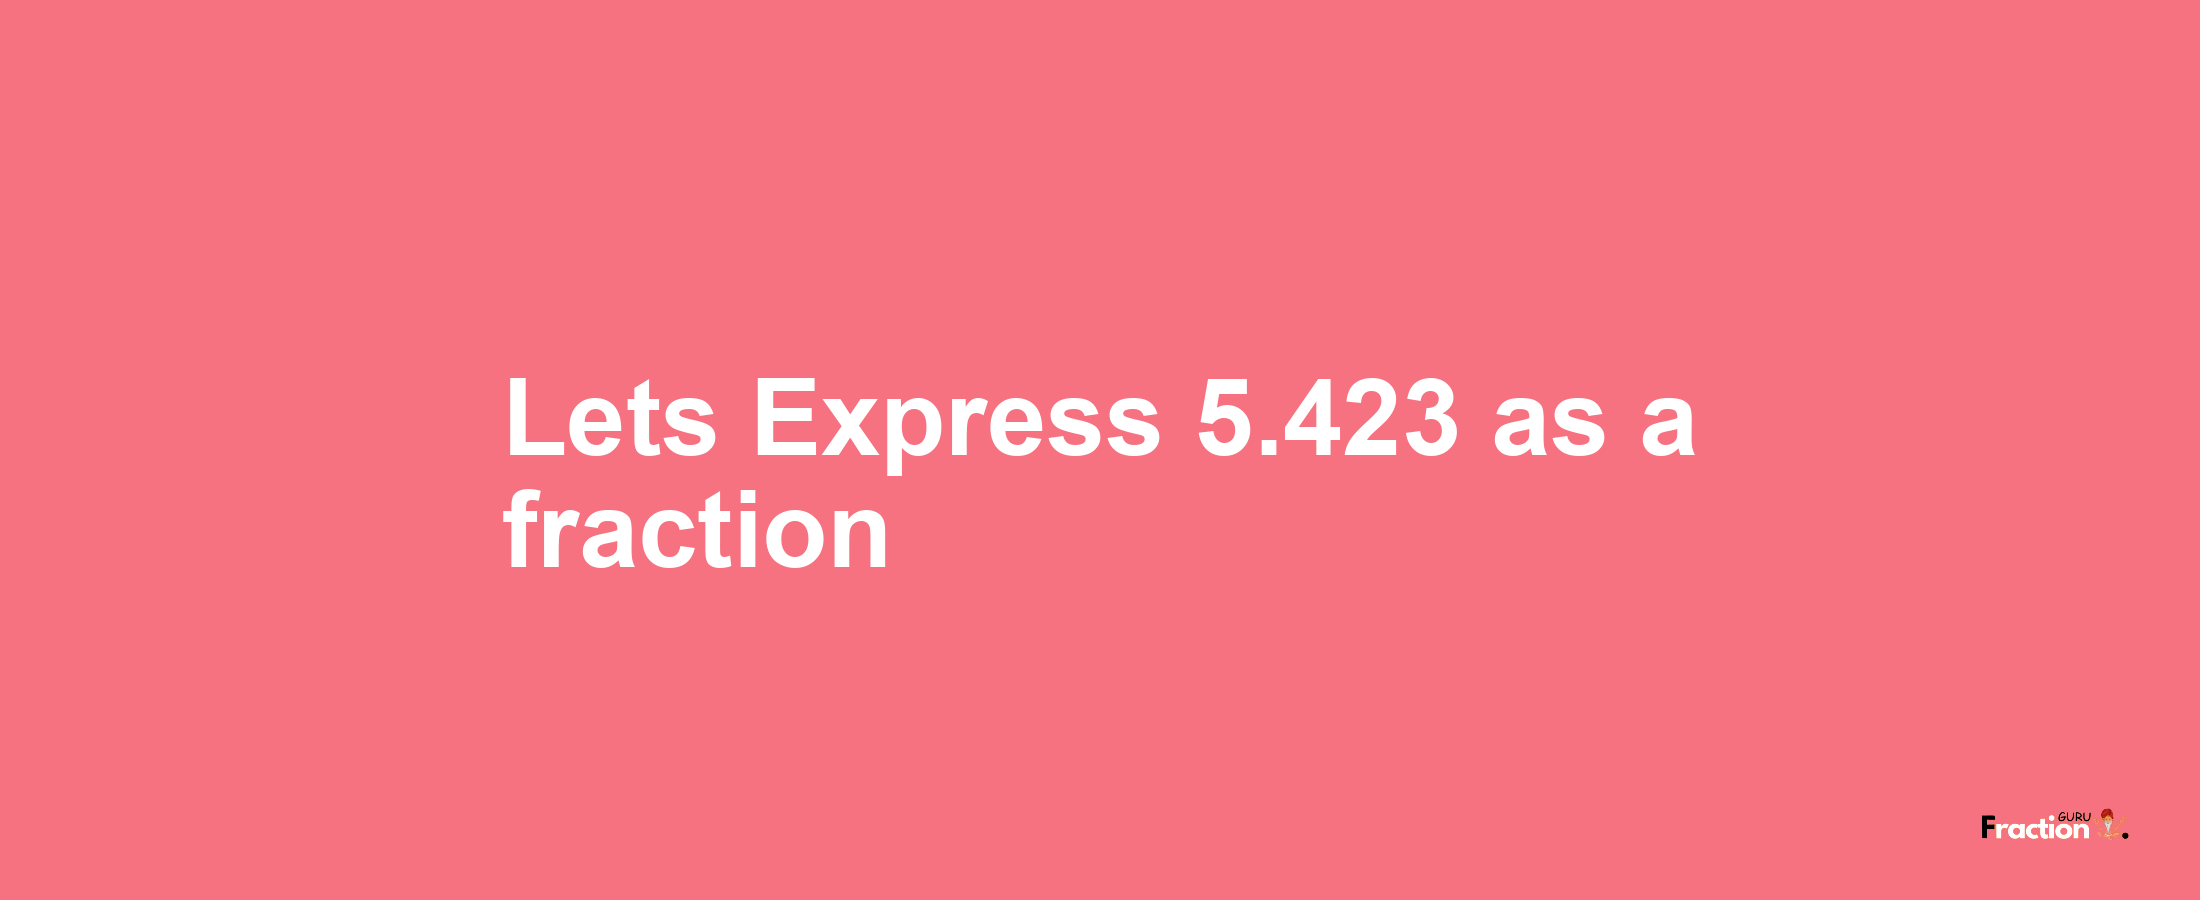 Lets Express 5.423 as afraction